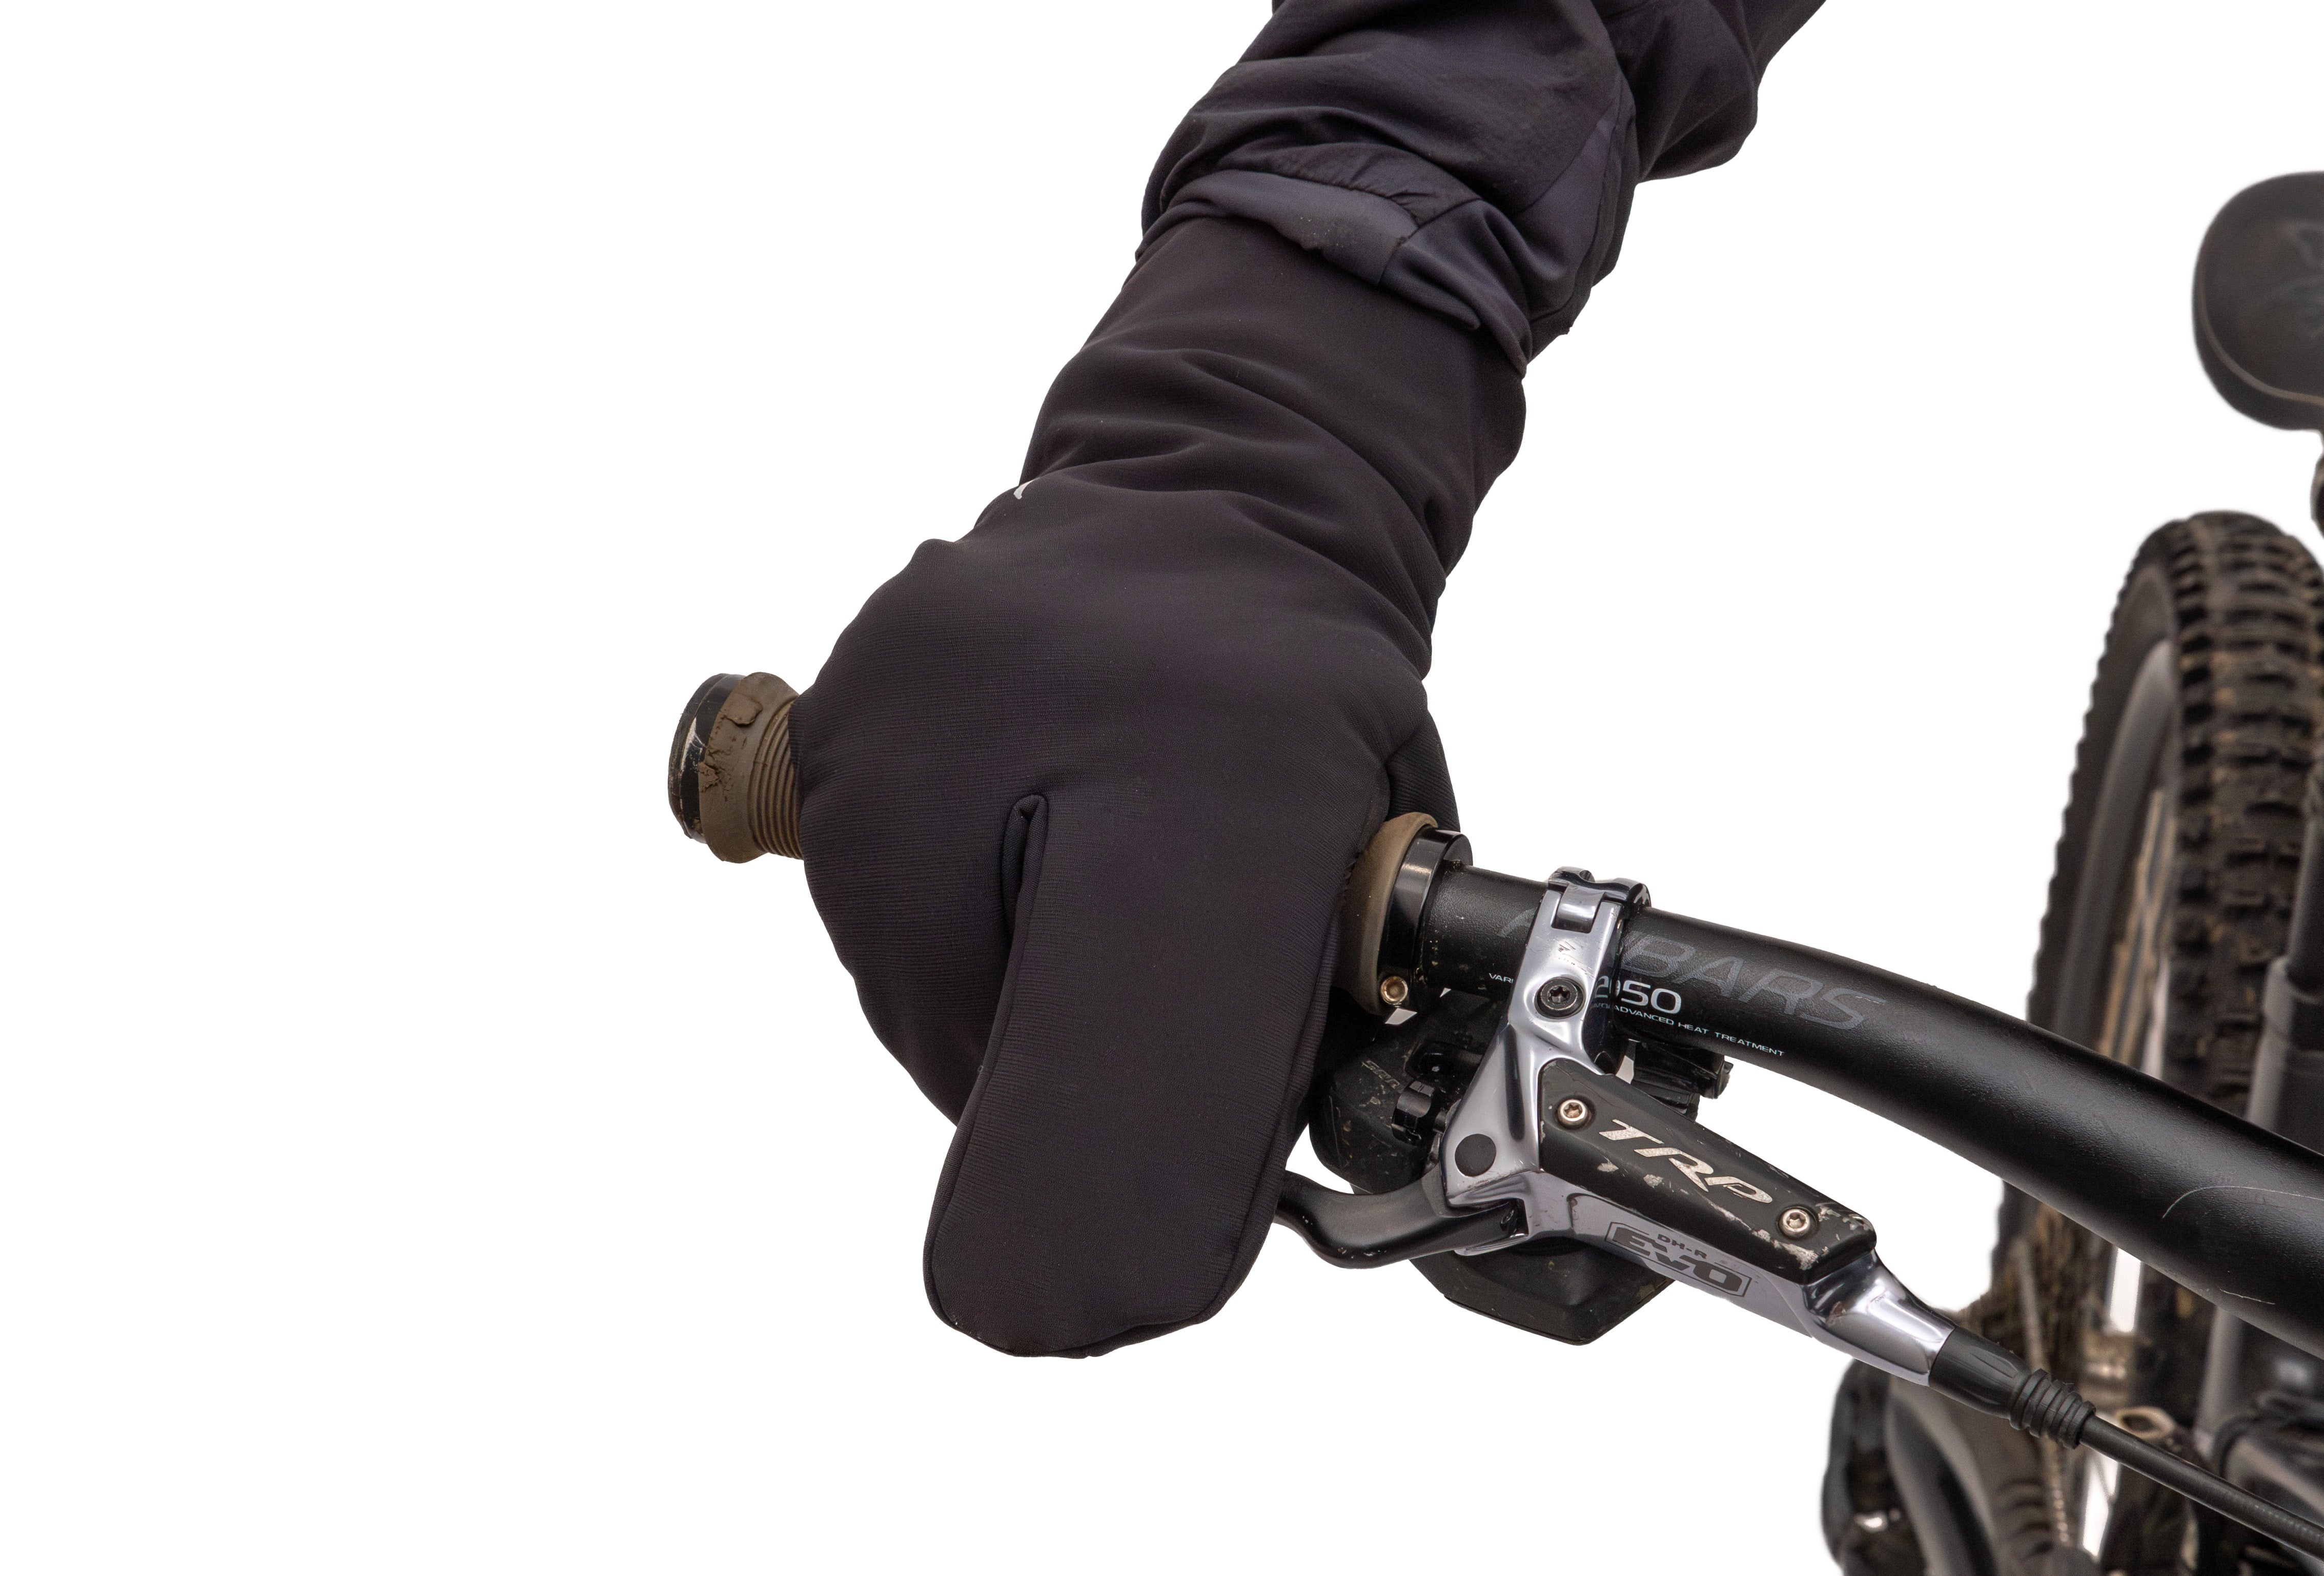 Specialized Lobster Glove Review